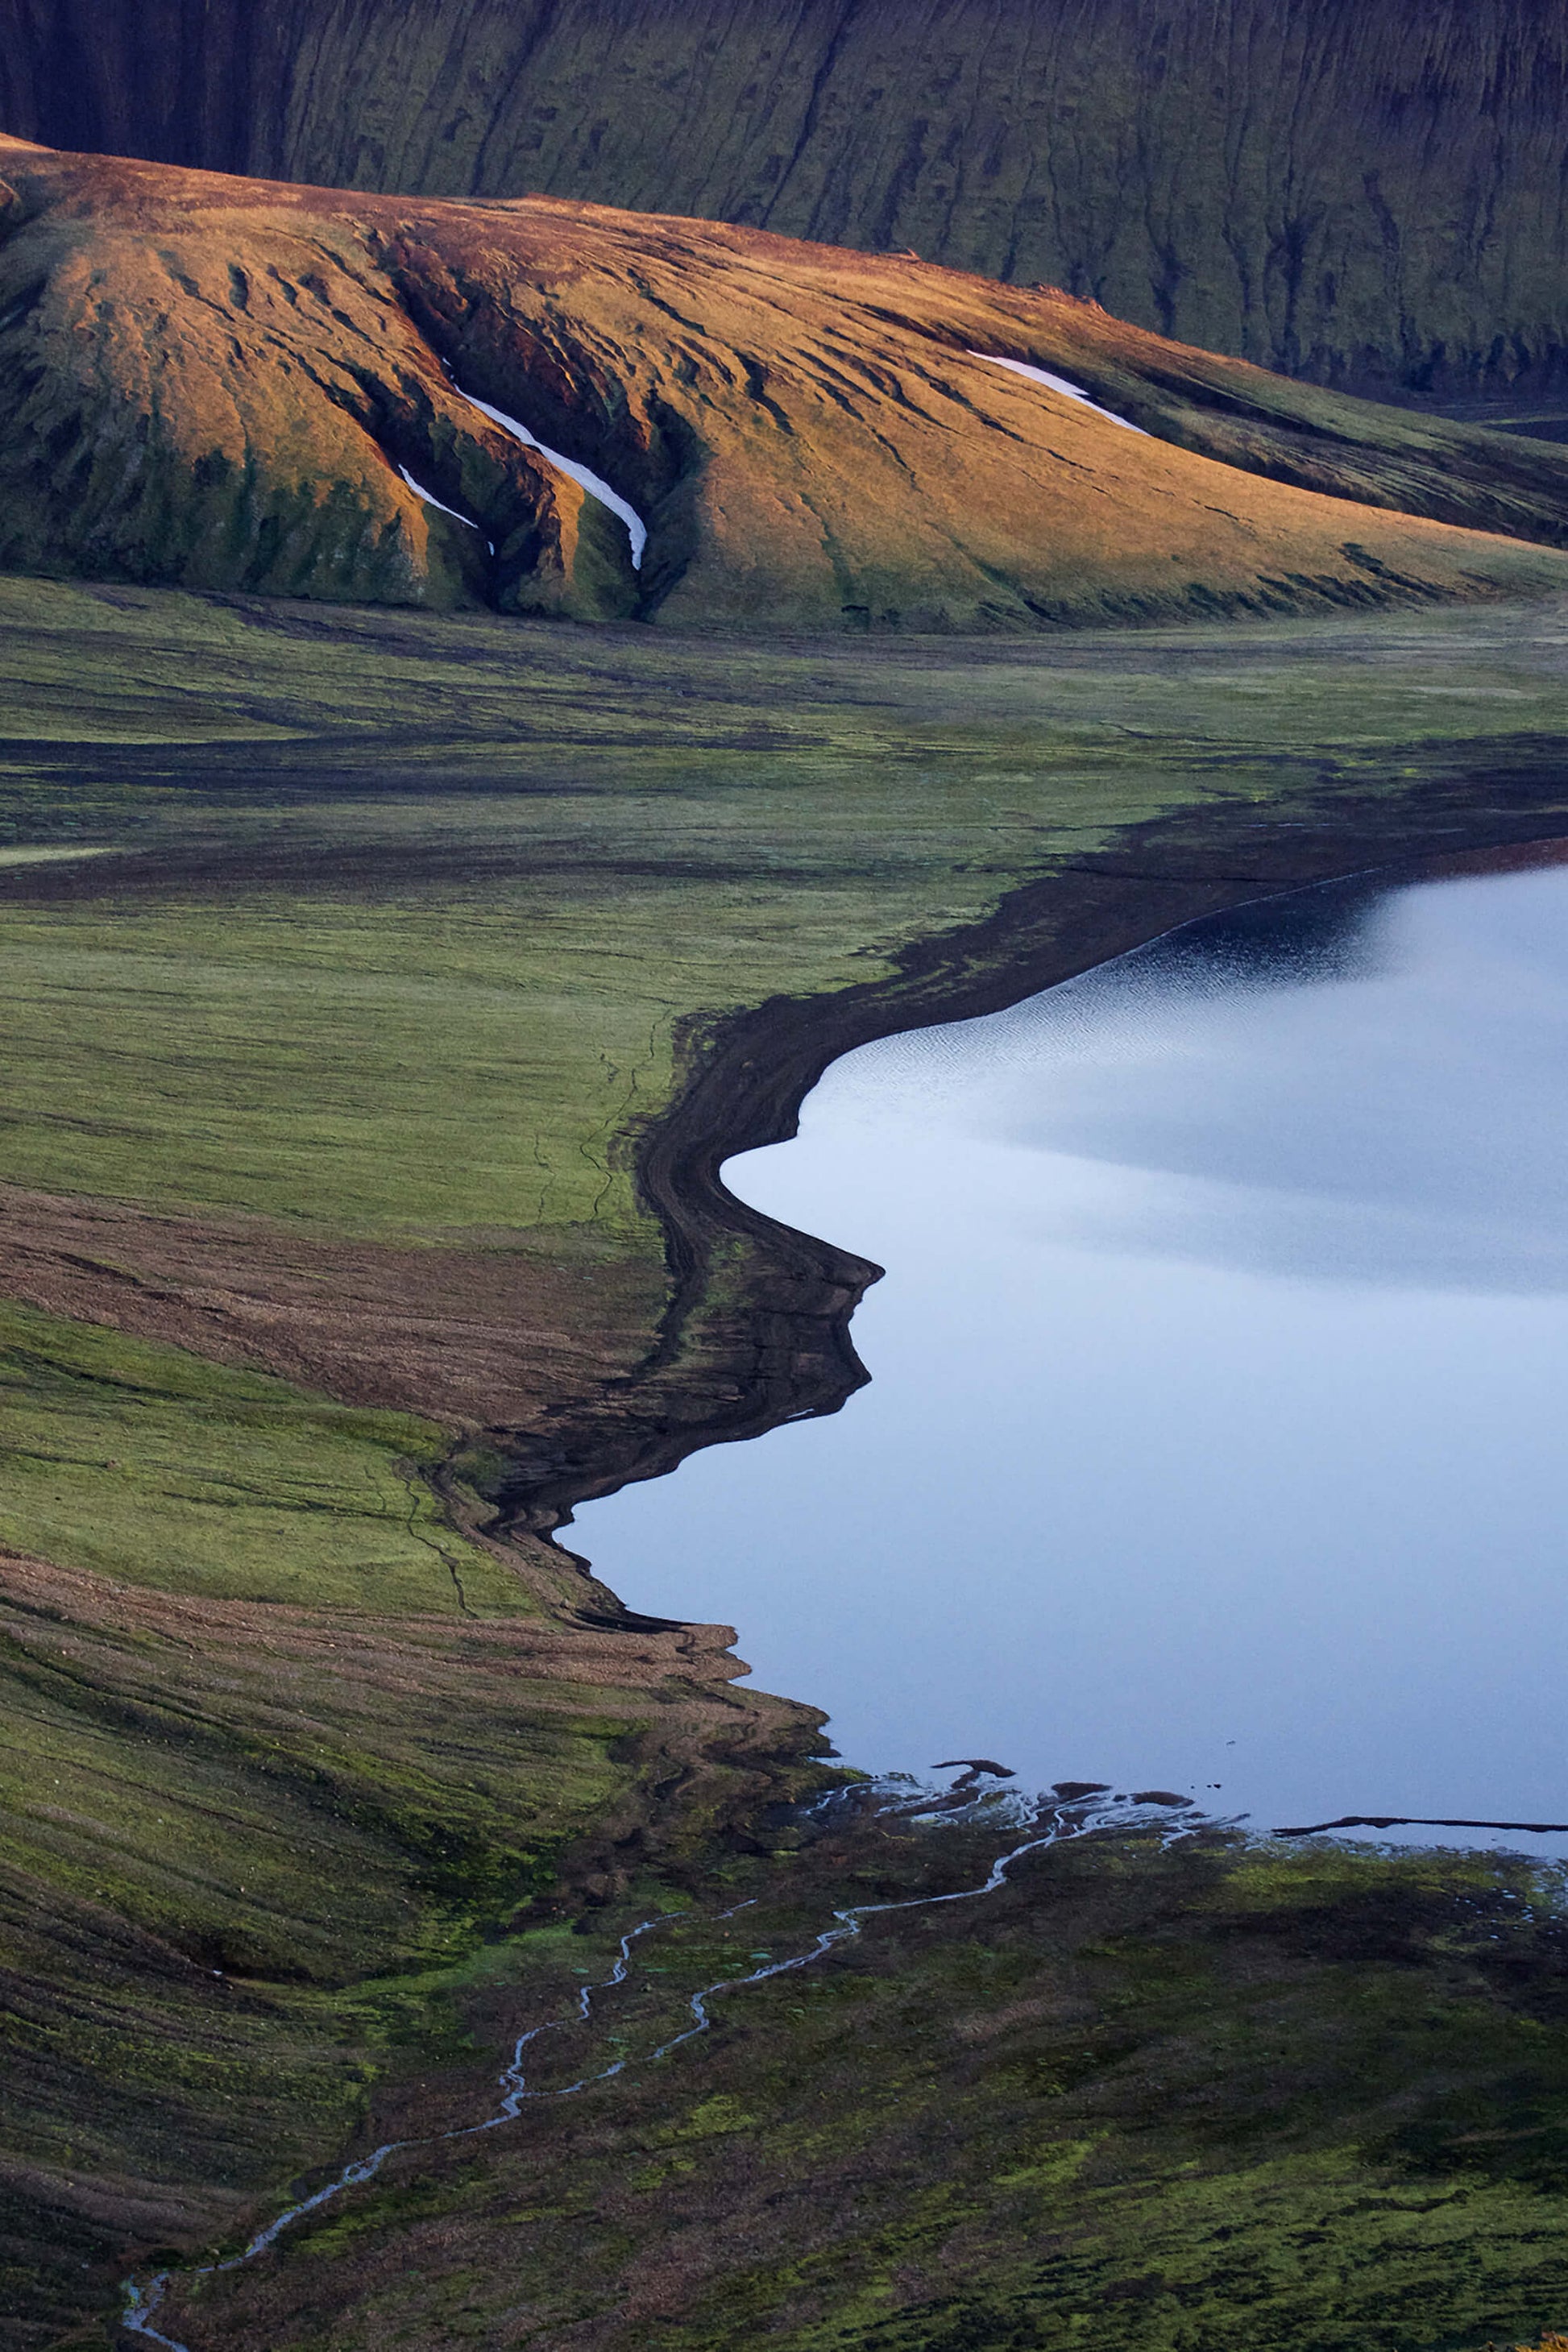 Edge of a lake in the highlands of Iceland